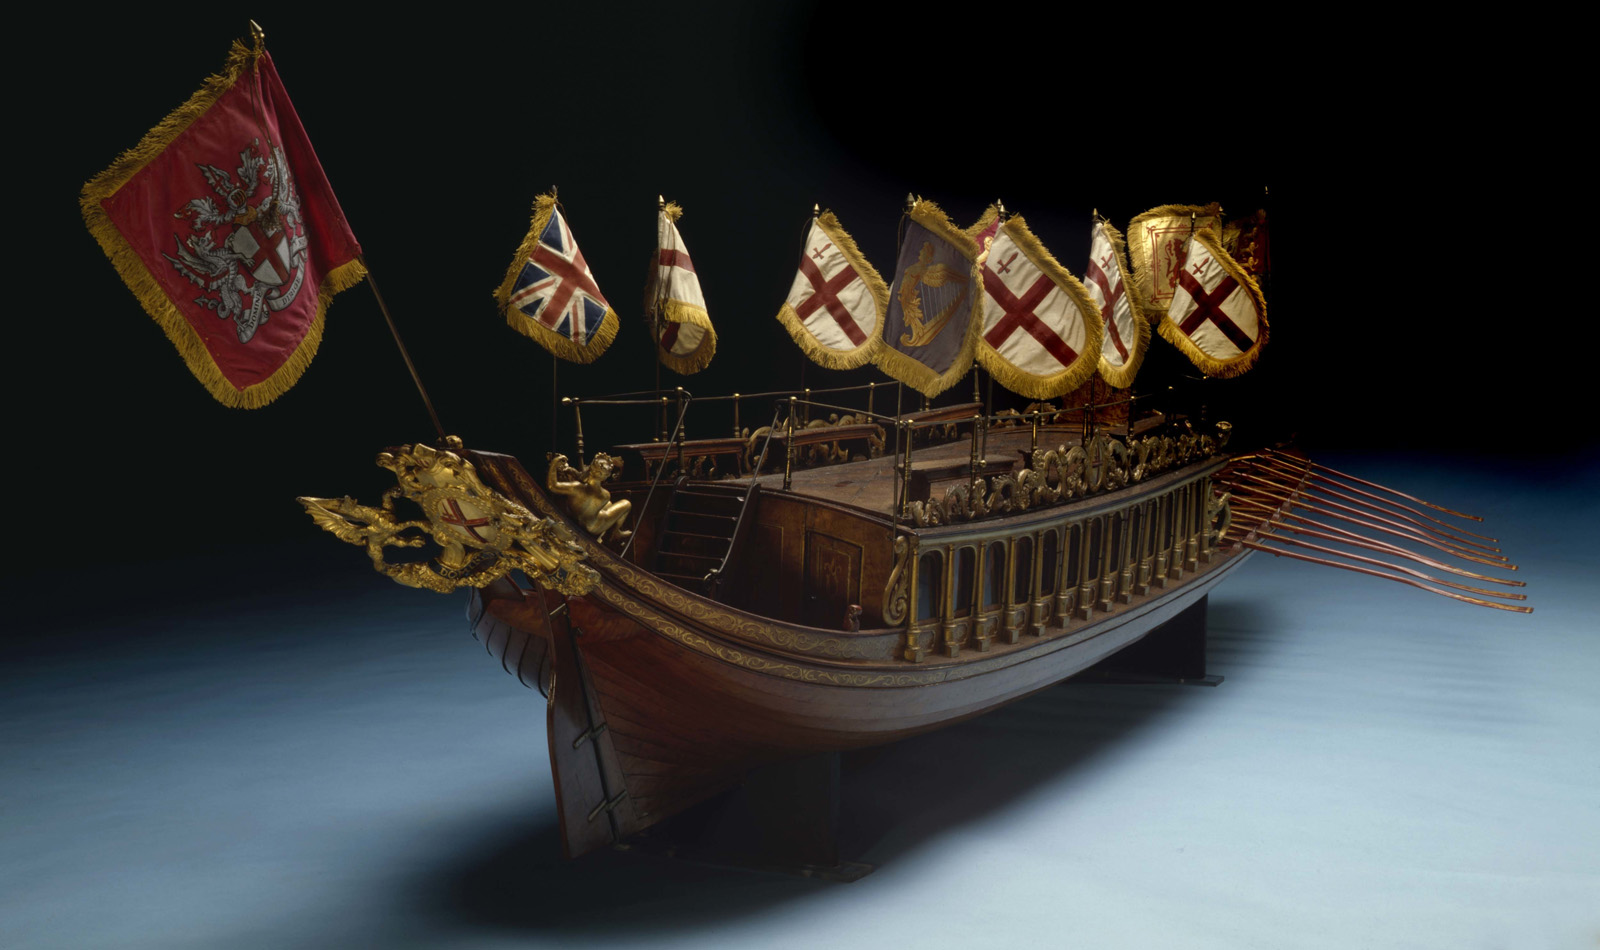 Ceremonial barge of the Mayor of London model, on display in the City and River gallery, Museum of London Docklands.